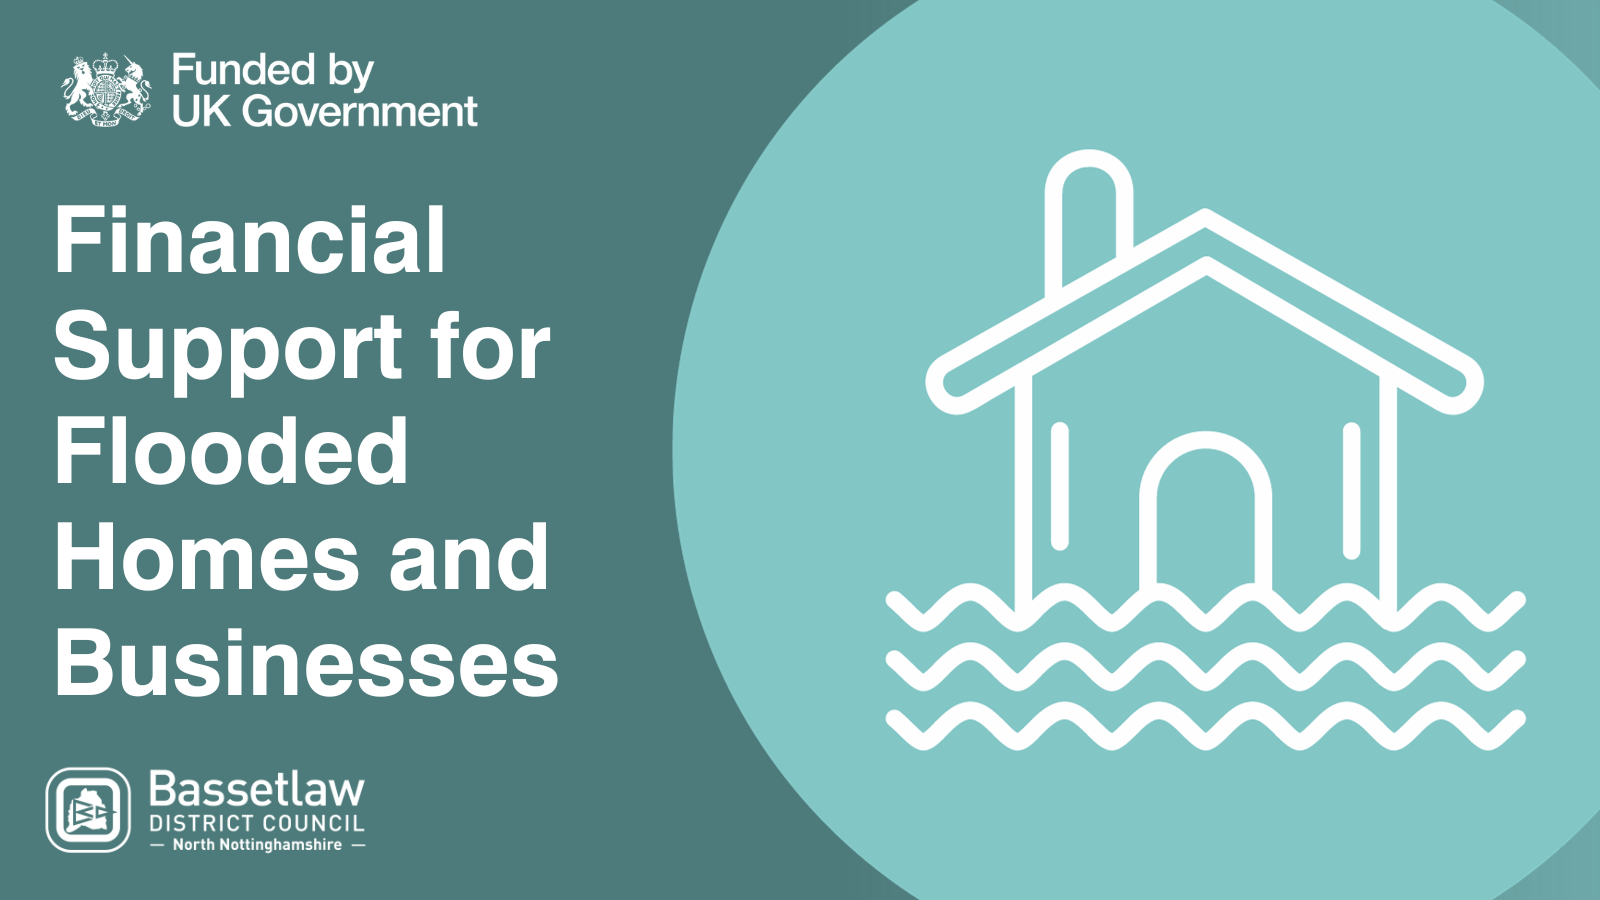 Flood funding available for homes and businesses